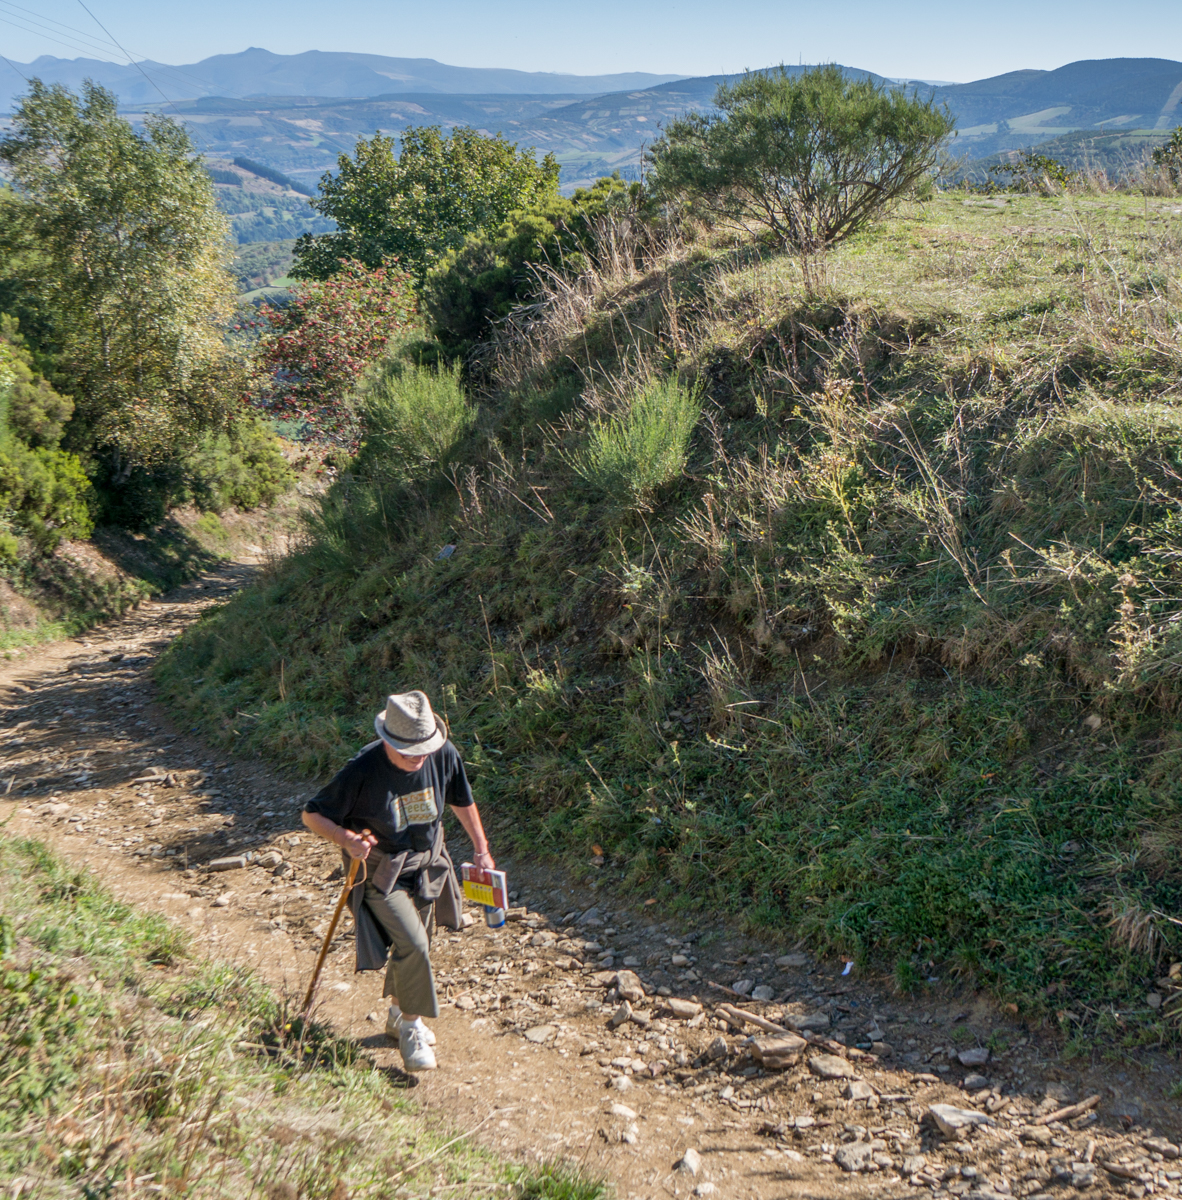 A Camino pilgrim approaches the summit of Alto do Poio, Spain | Photo by Mike Hudak